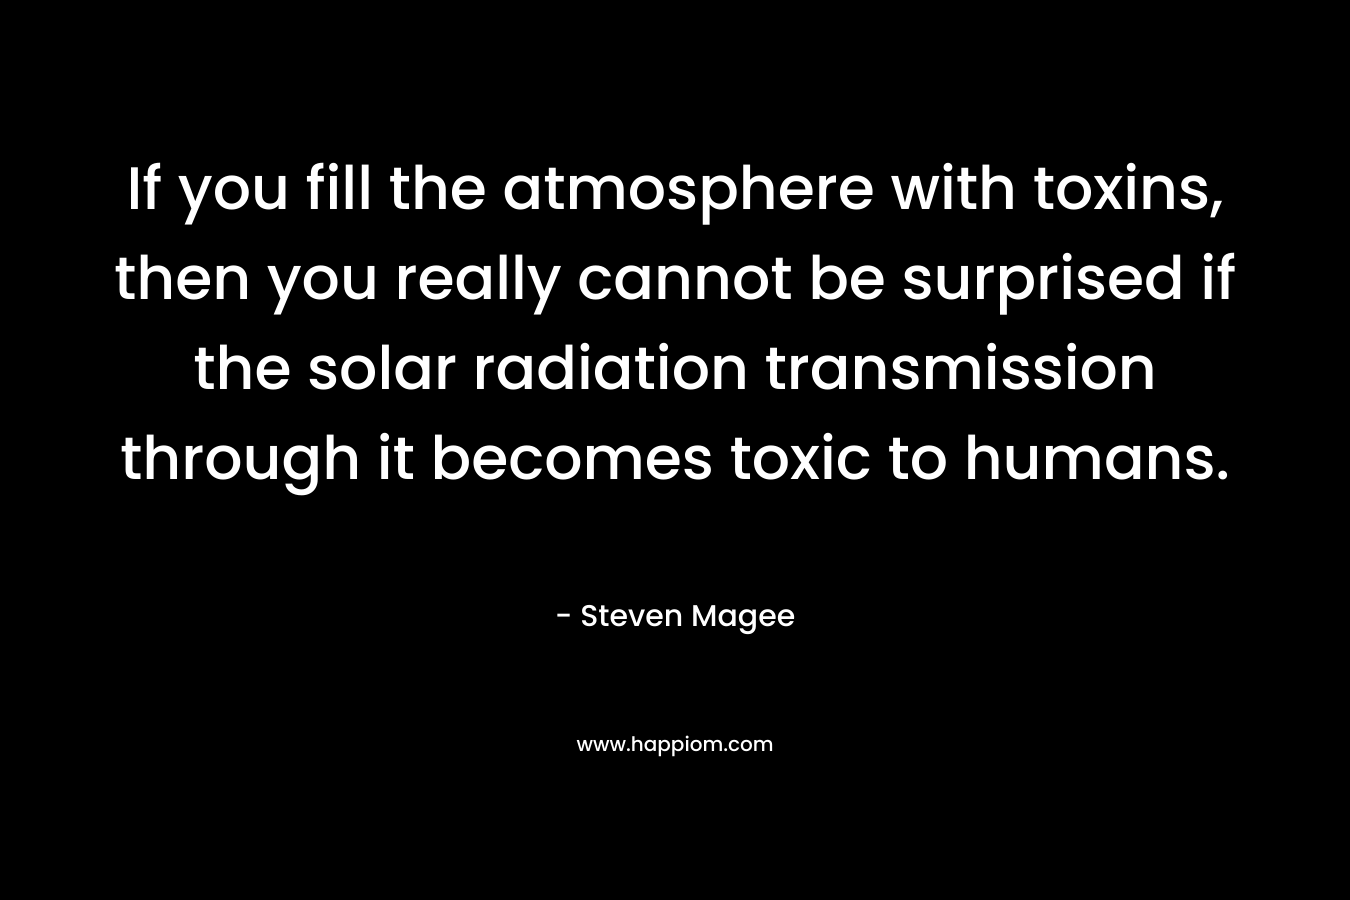 If you fill the atmosphere with toxins, then you really cannot be surprised if the solar radiation transmission through it becomes toxic to humans. – Steven Magee